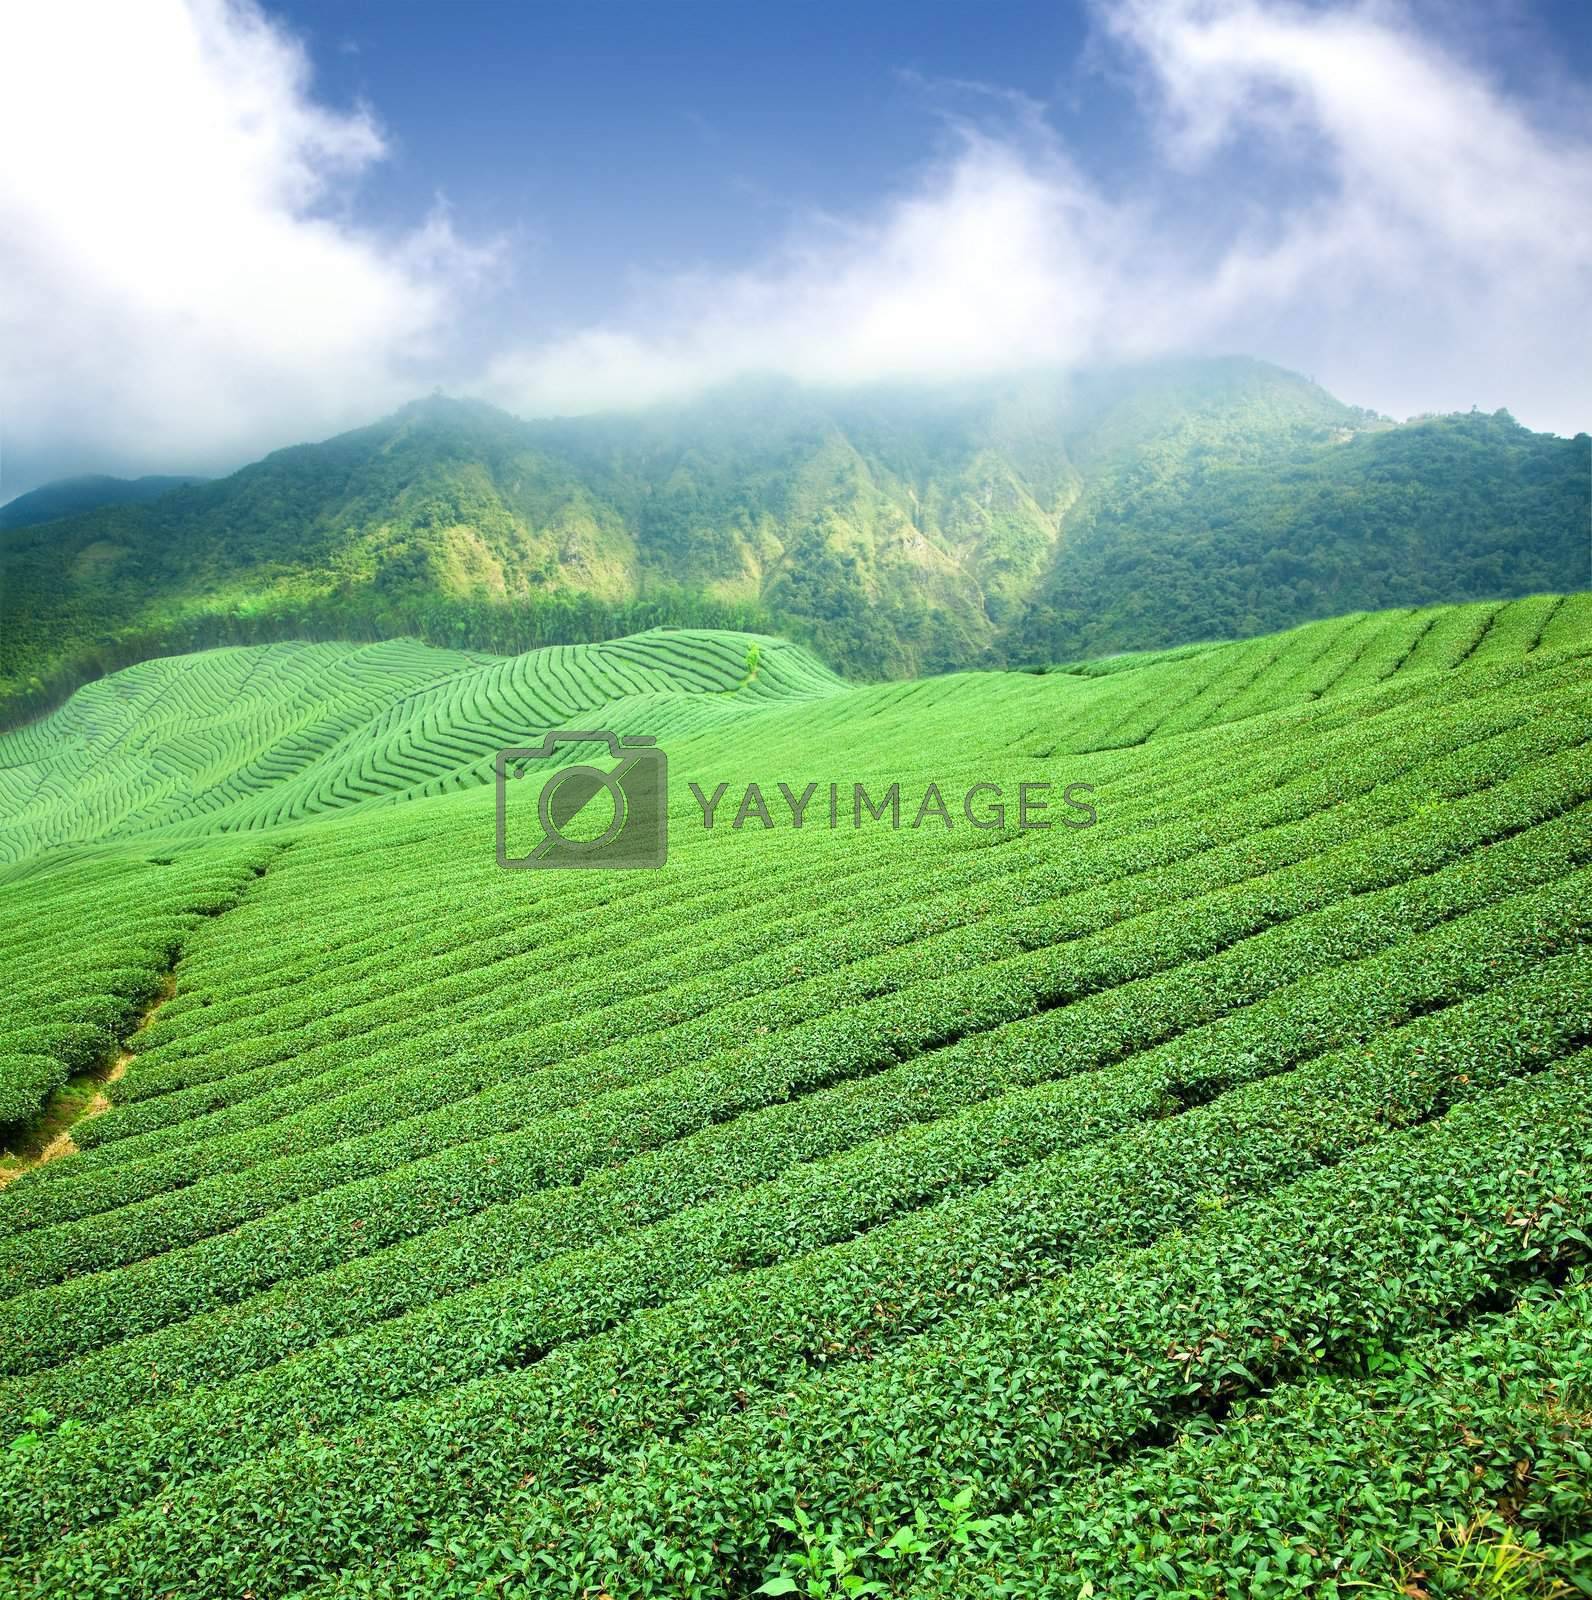 Royalty free image of green tea plantation with cloud in asia by tomwang